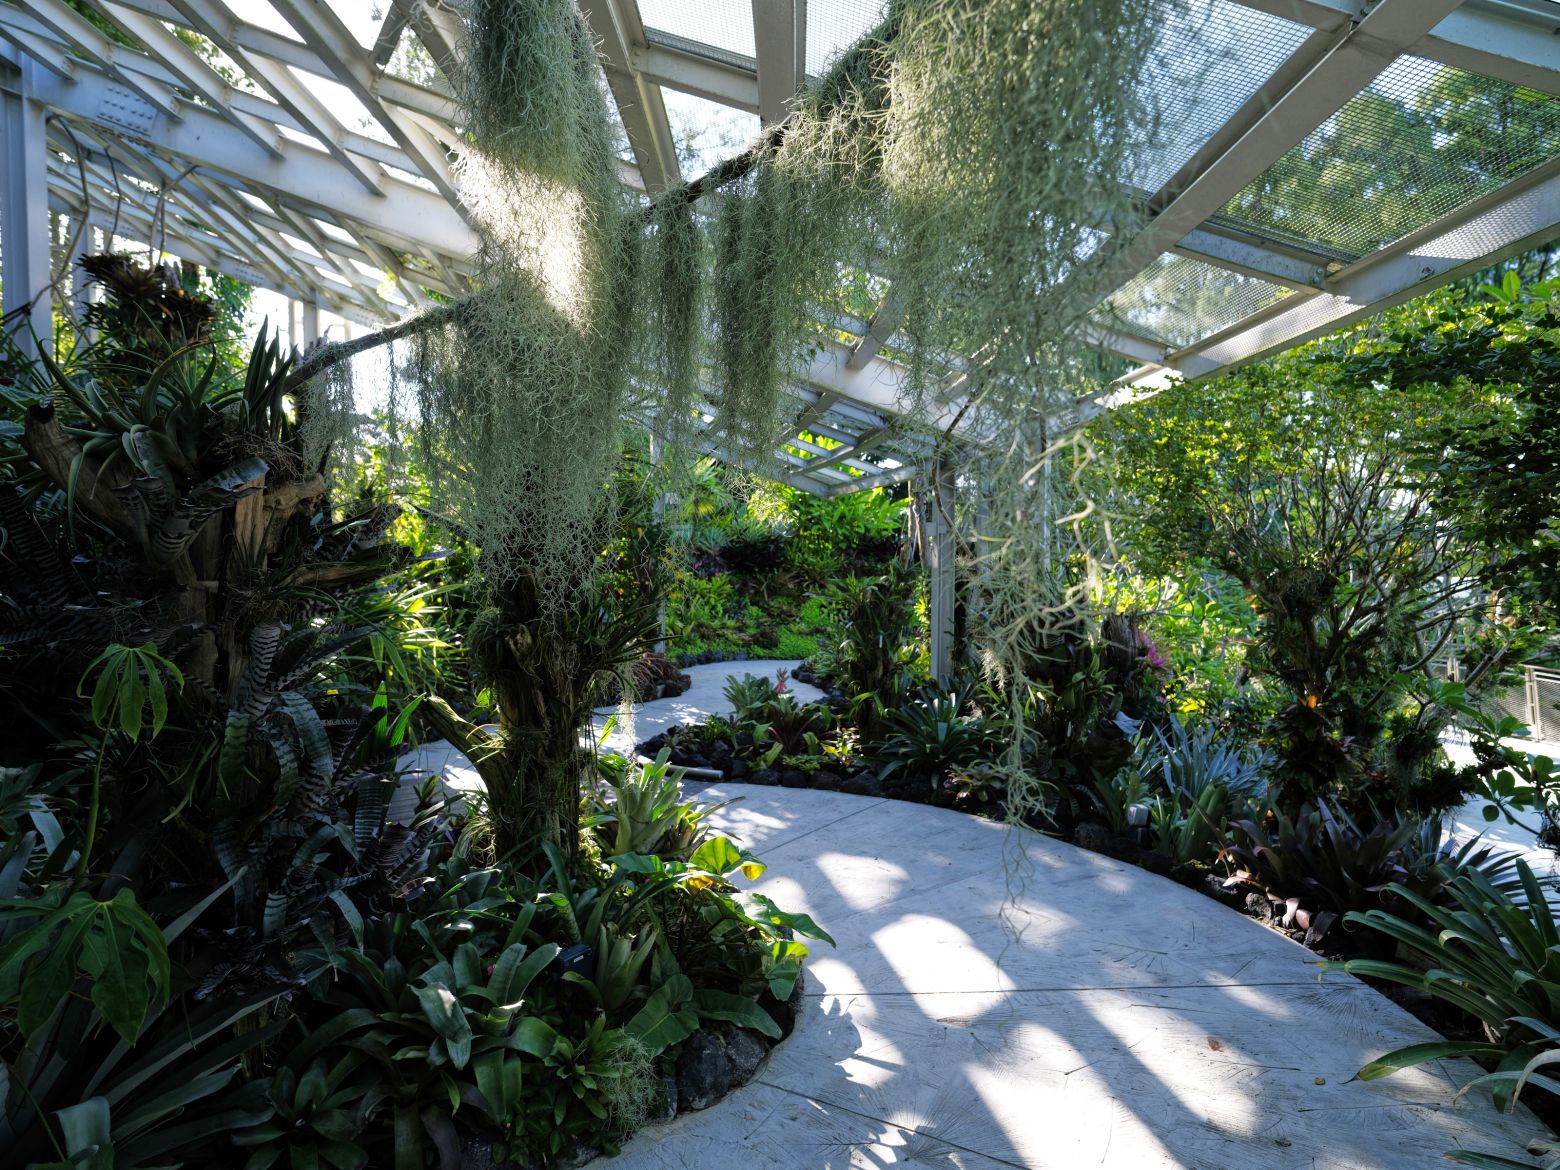 Enhanced National Orchid Garden Further Promotes Orchid Biodiversity Conservation